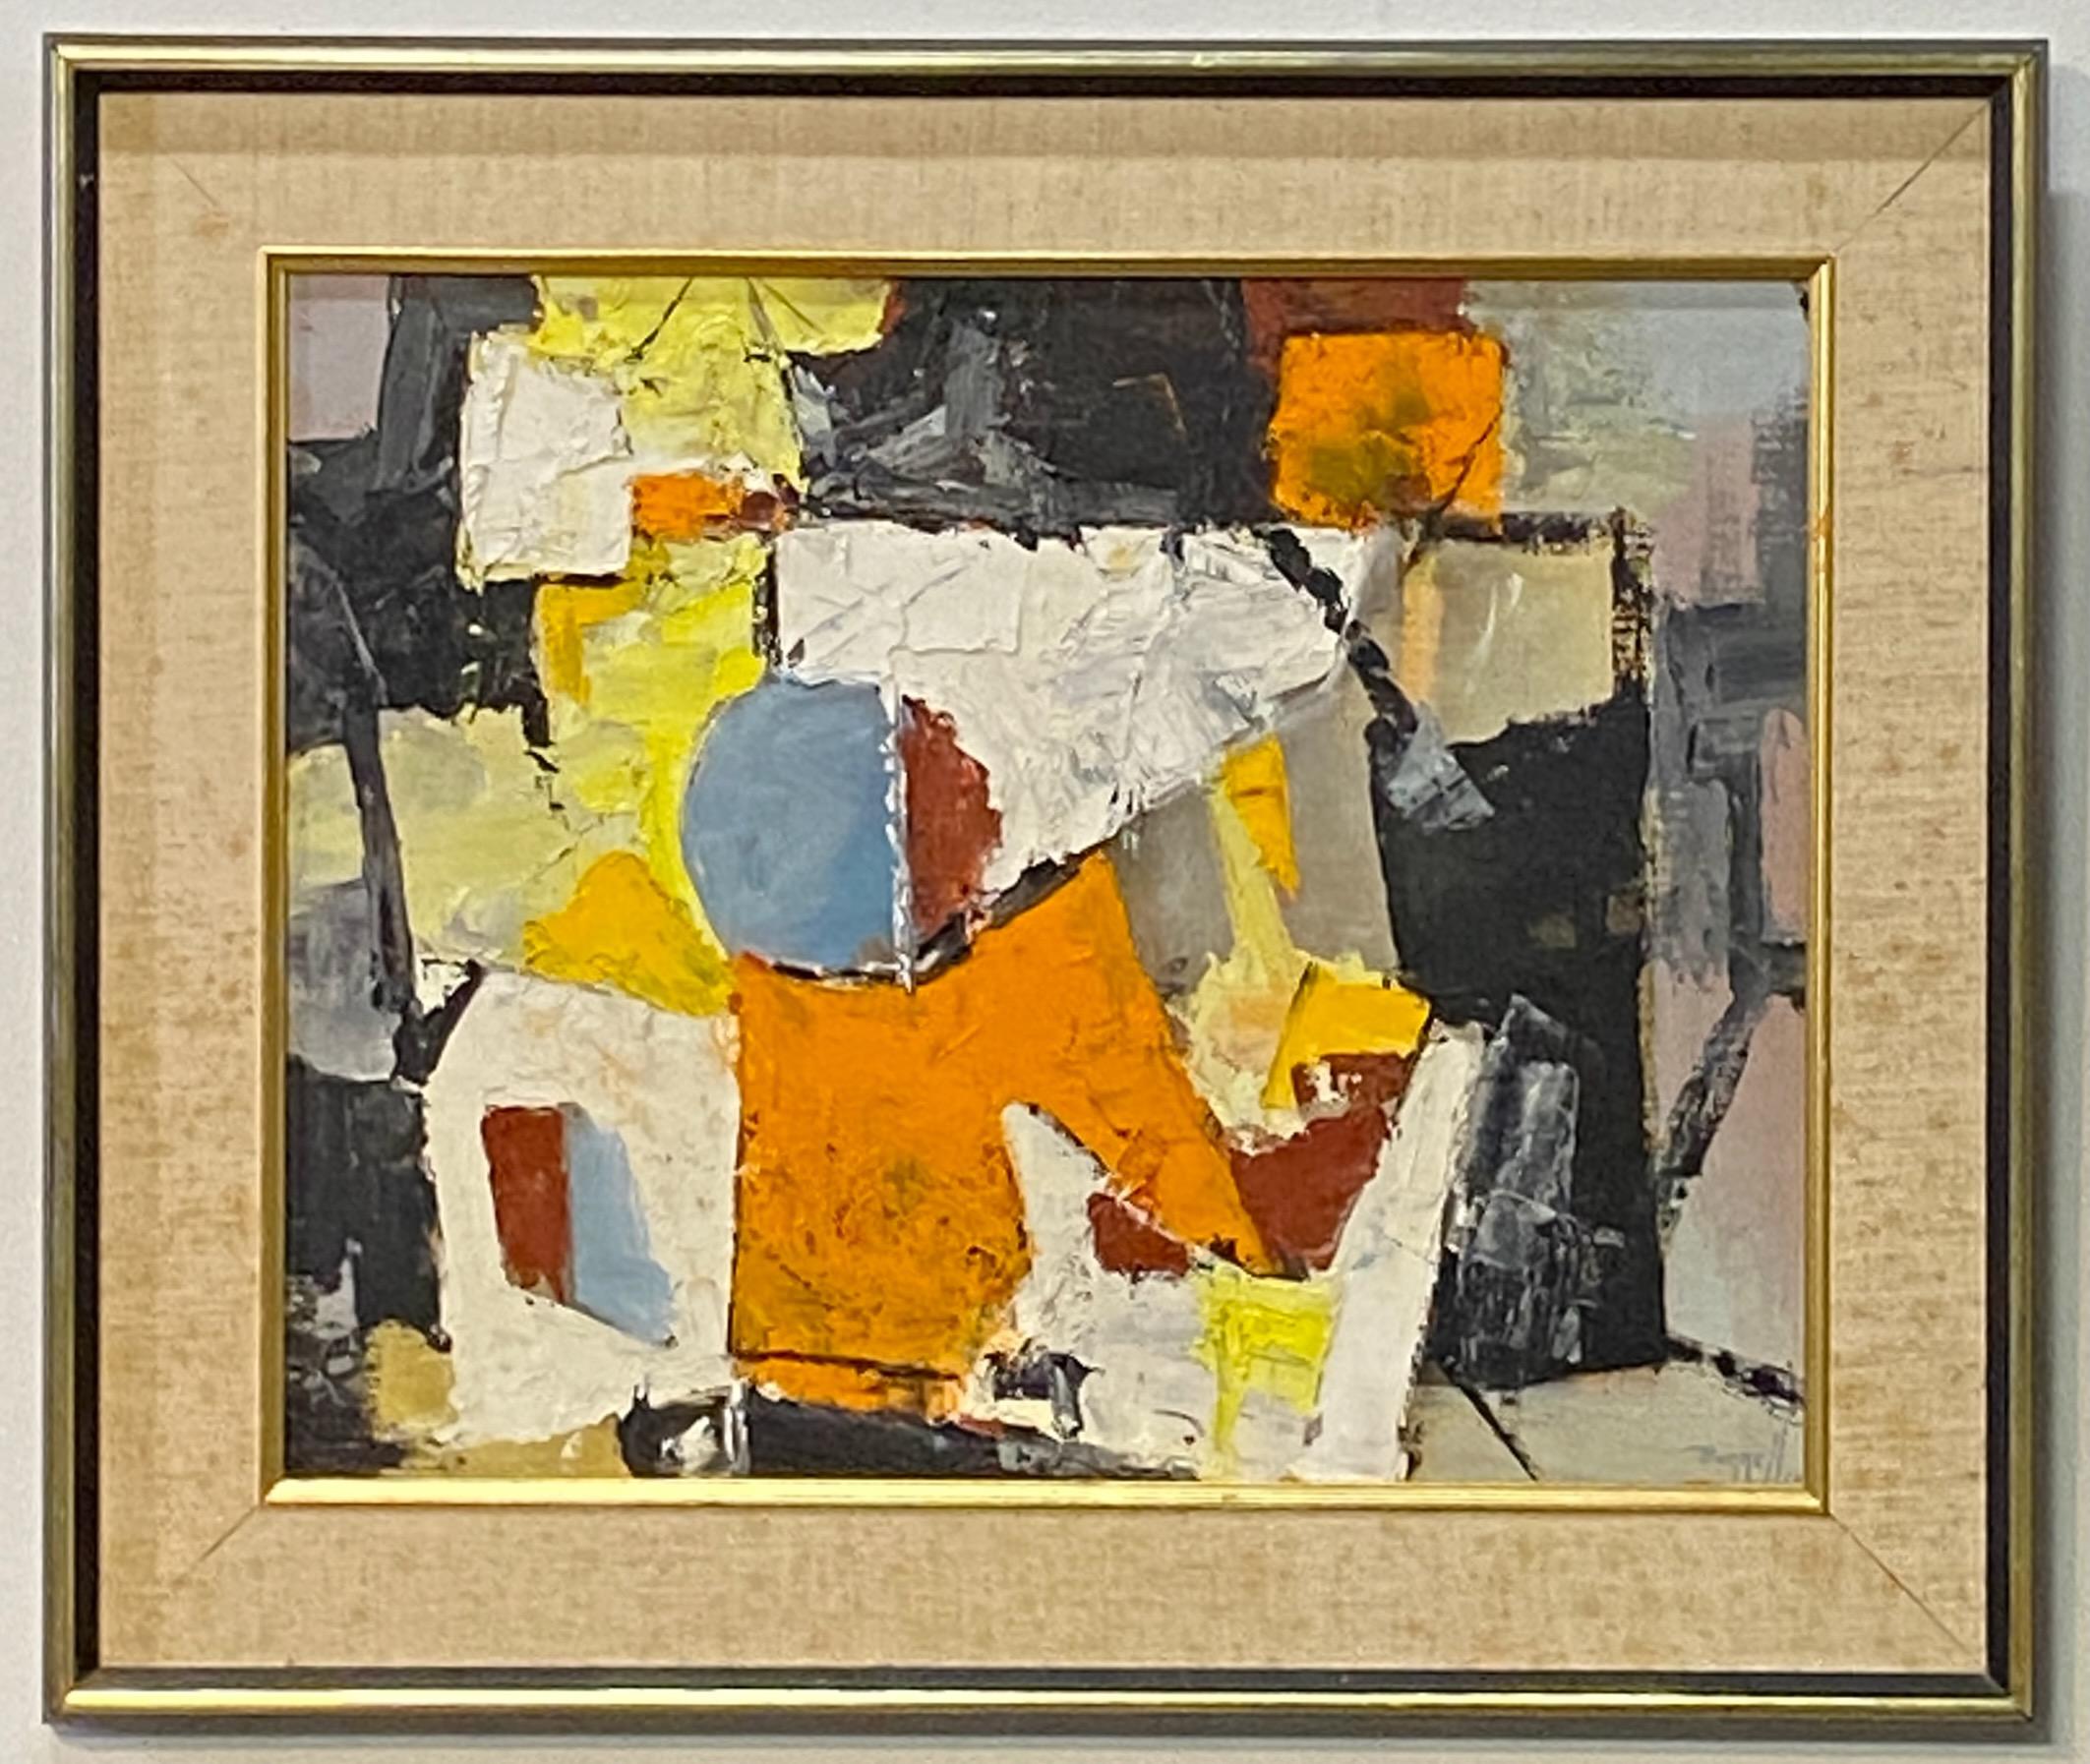 Mid-century impressionist abstract painting signed Bunnell '59.
Framed acrylic on canvas. 
Painting is in excellent condition. Some light foxing on the linen mat.

Charles Ragland Bunnell (January 17, 1897 – September 1968), was an American